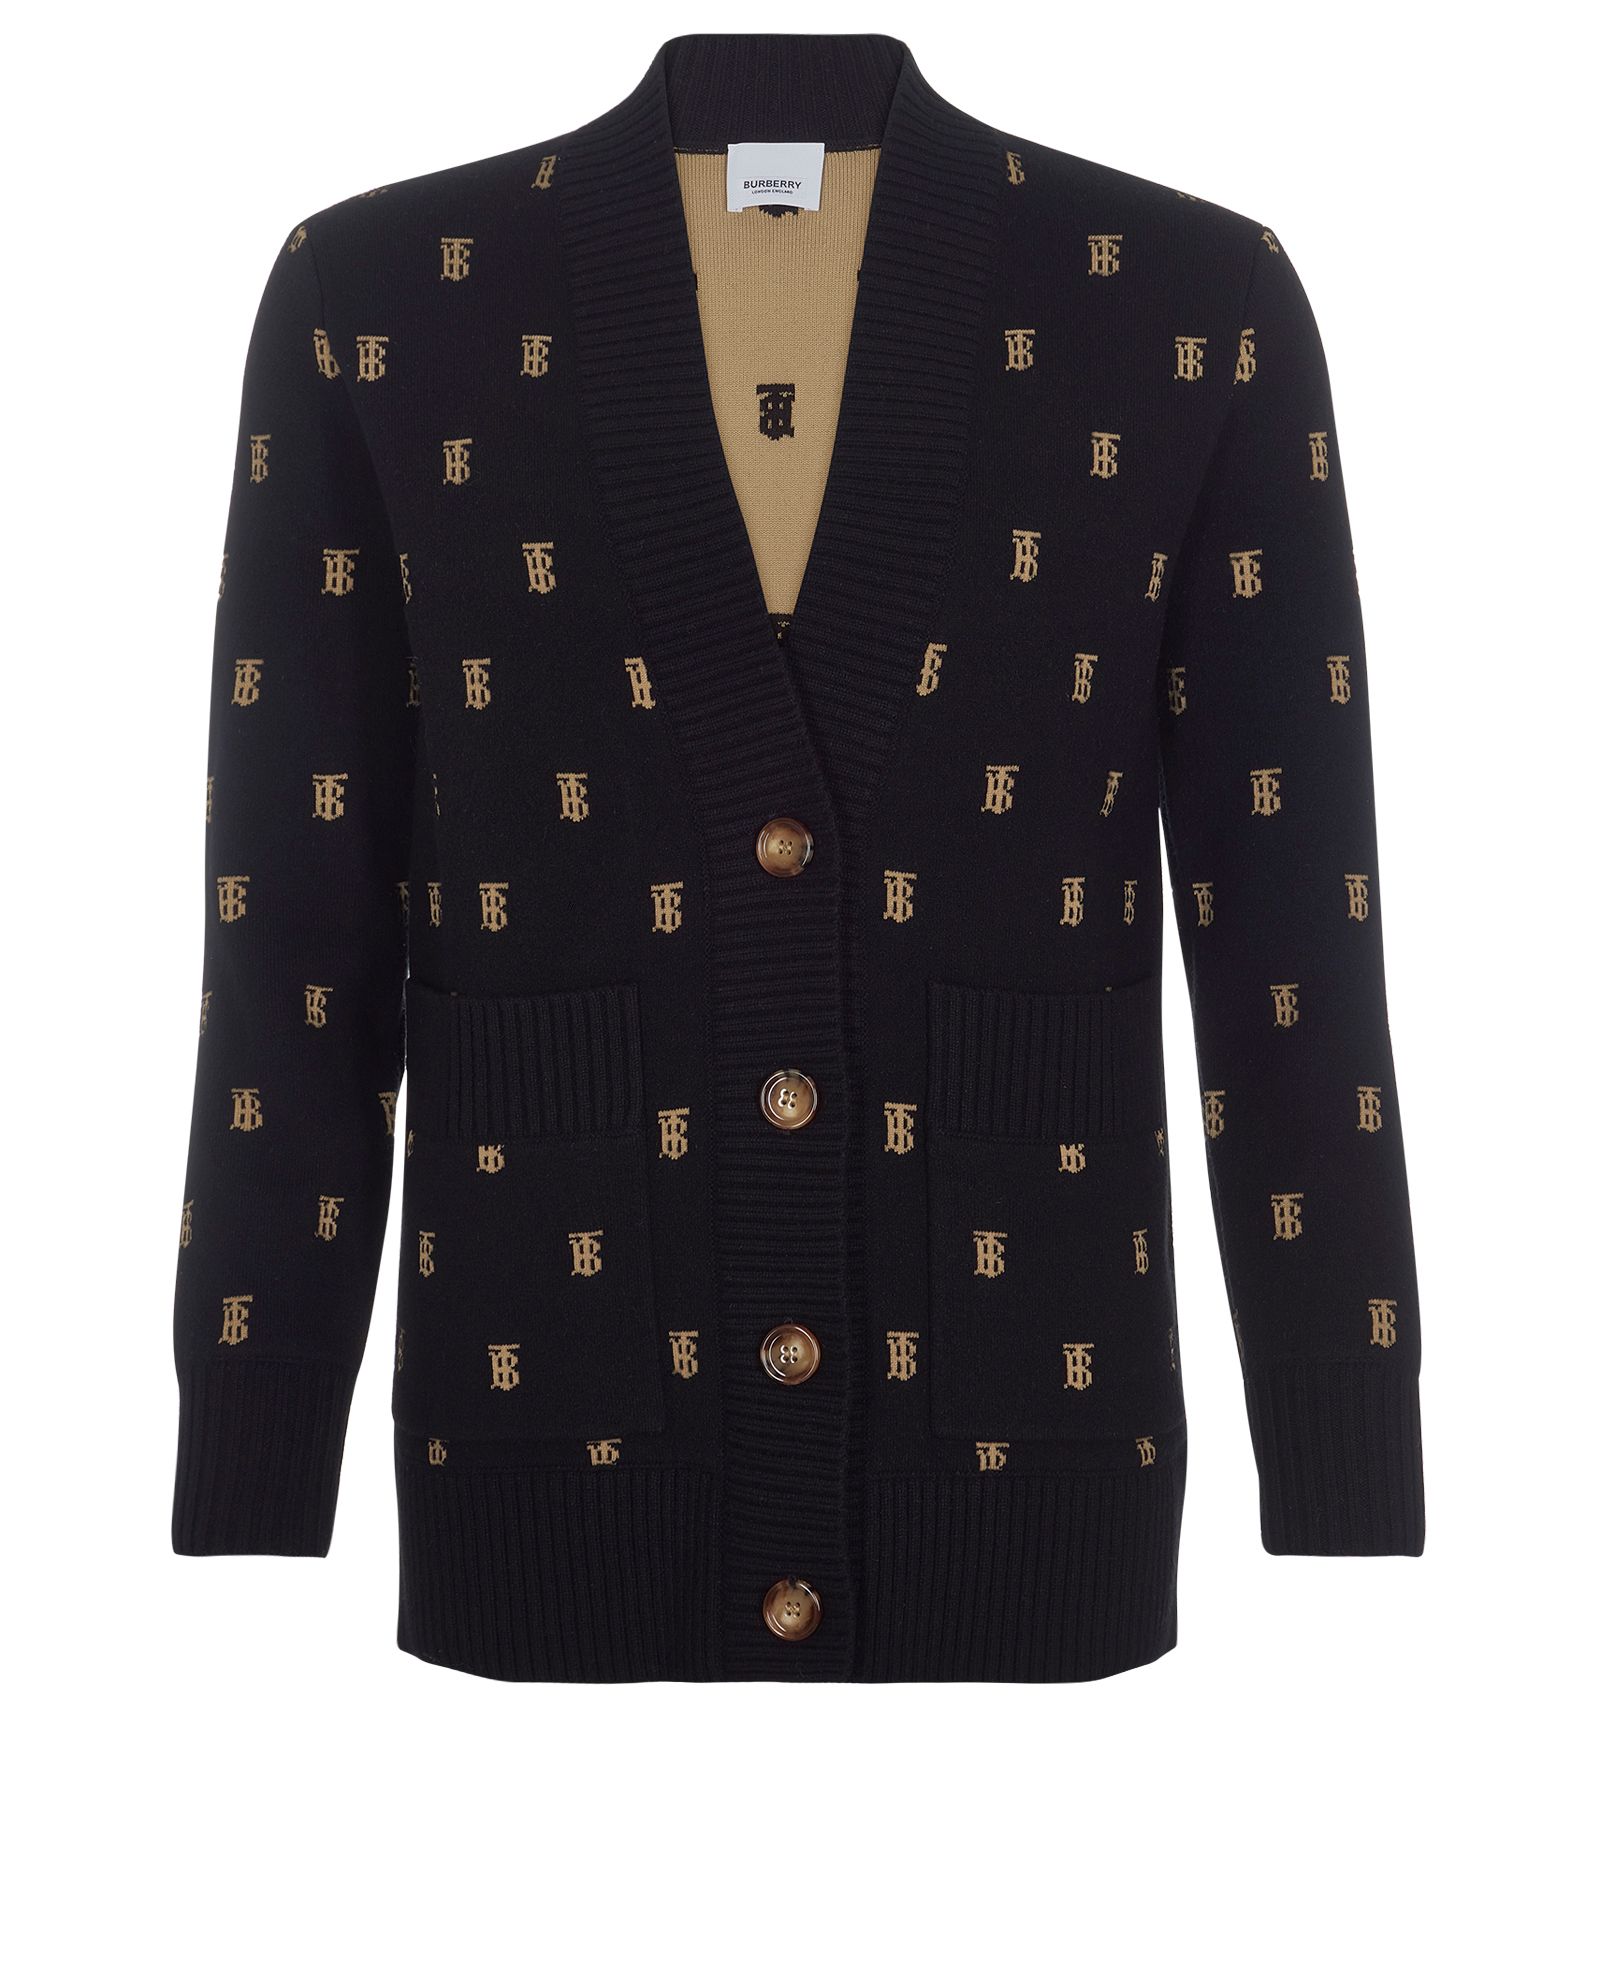 Burberry Palena Knit Cardigan, Jumpers - Designer Exchange | Buy Sell ...